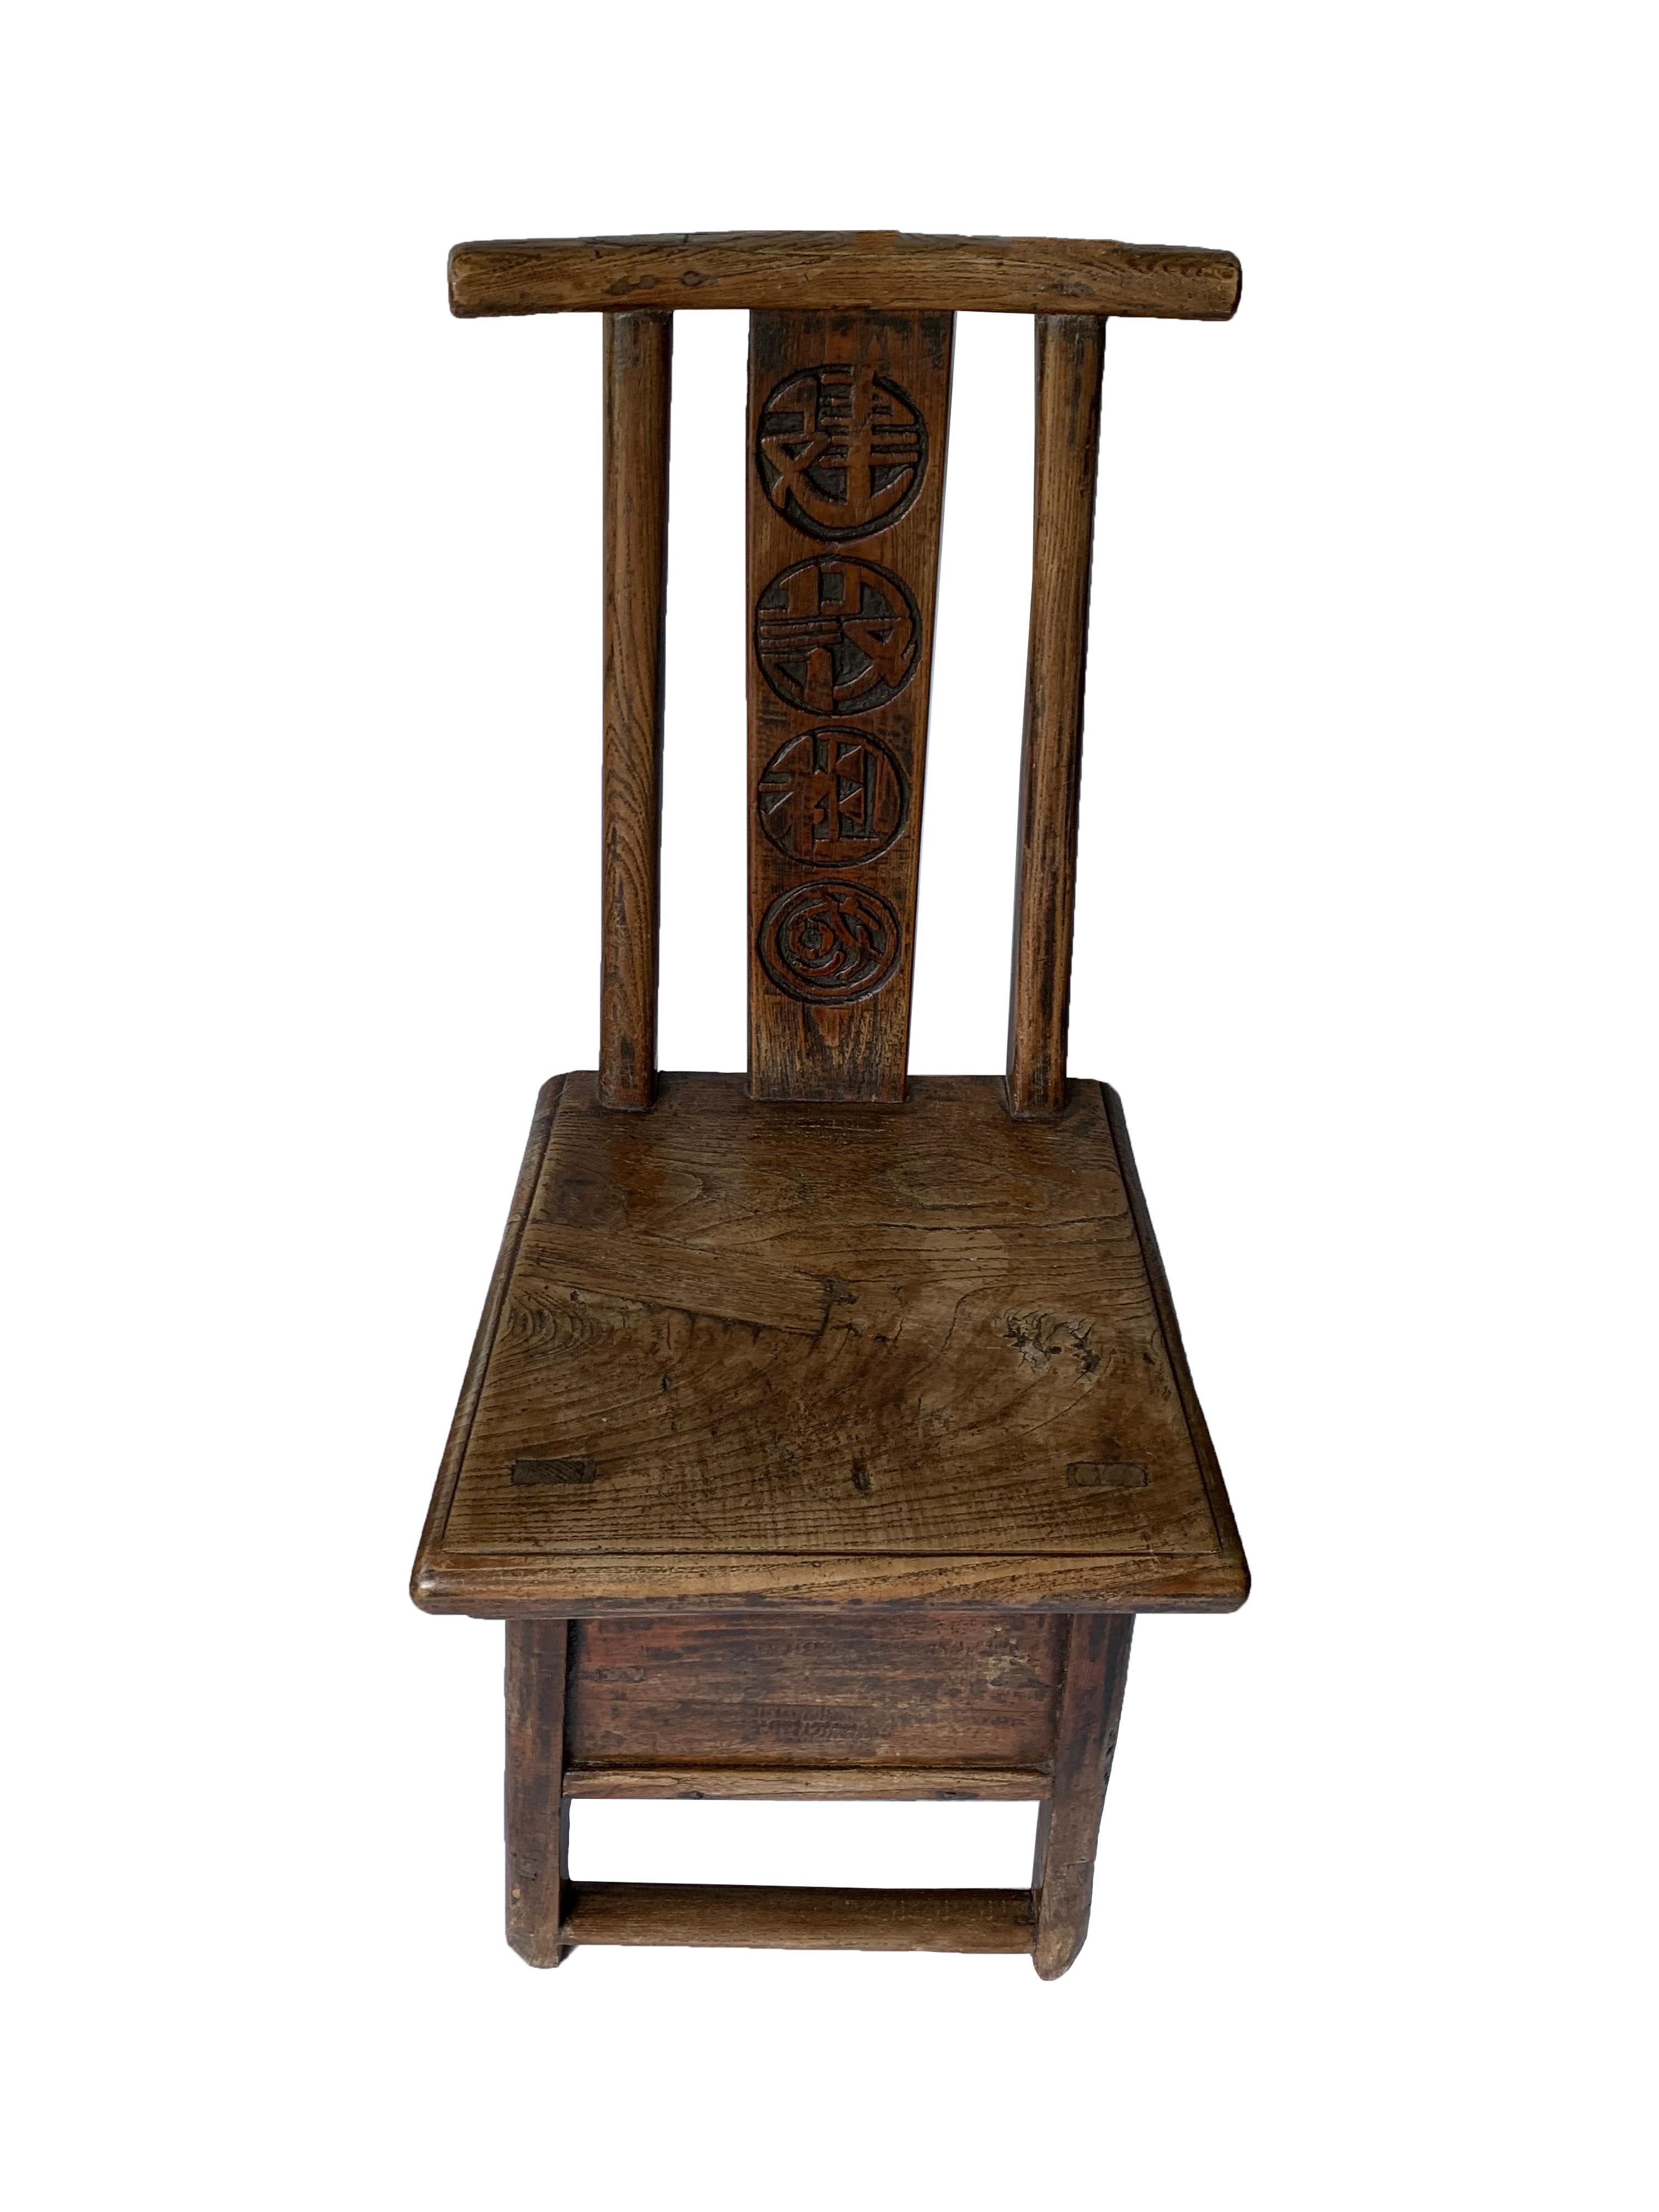 An antique Chinese barber stool from China’s Gansu Province. This 19th century stool features a drawer on the backside where the barber would have stored his scissors and other tools. It is rare to find these stools with a backrest. 

Measures: